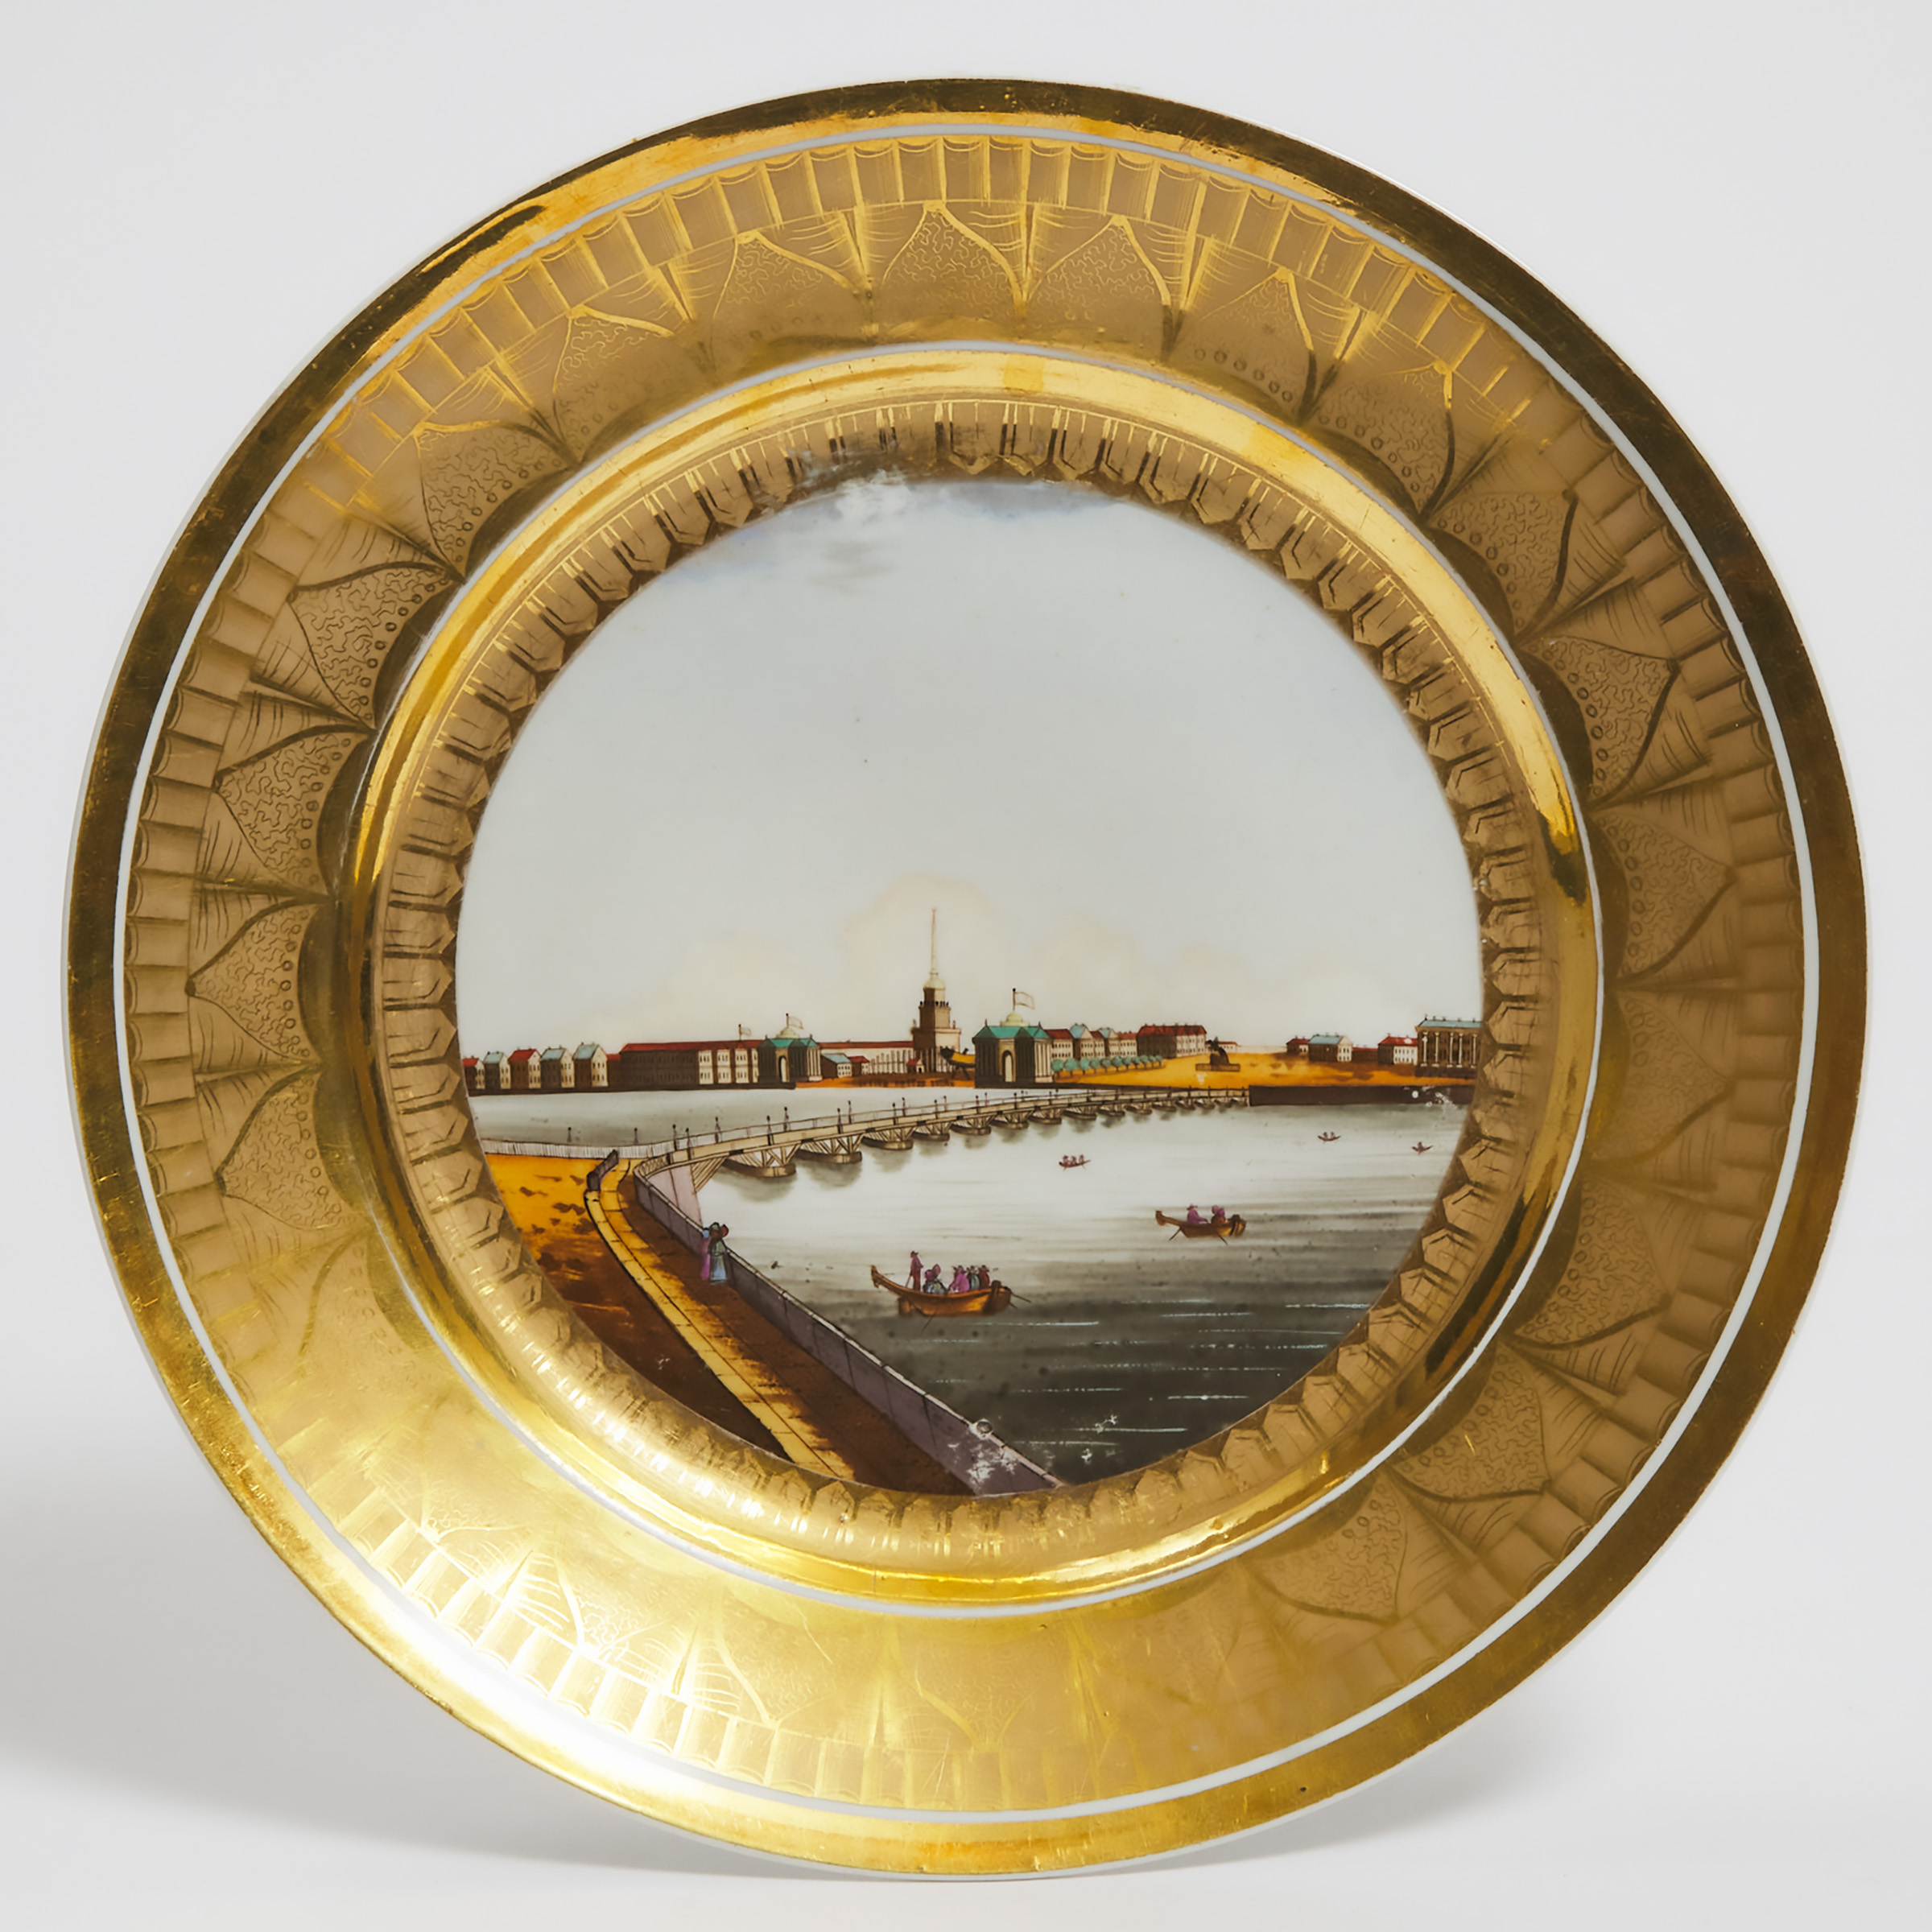 Russian Porcelain Topographical Plate, 19th century